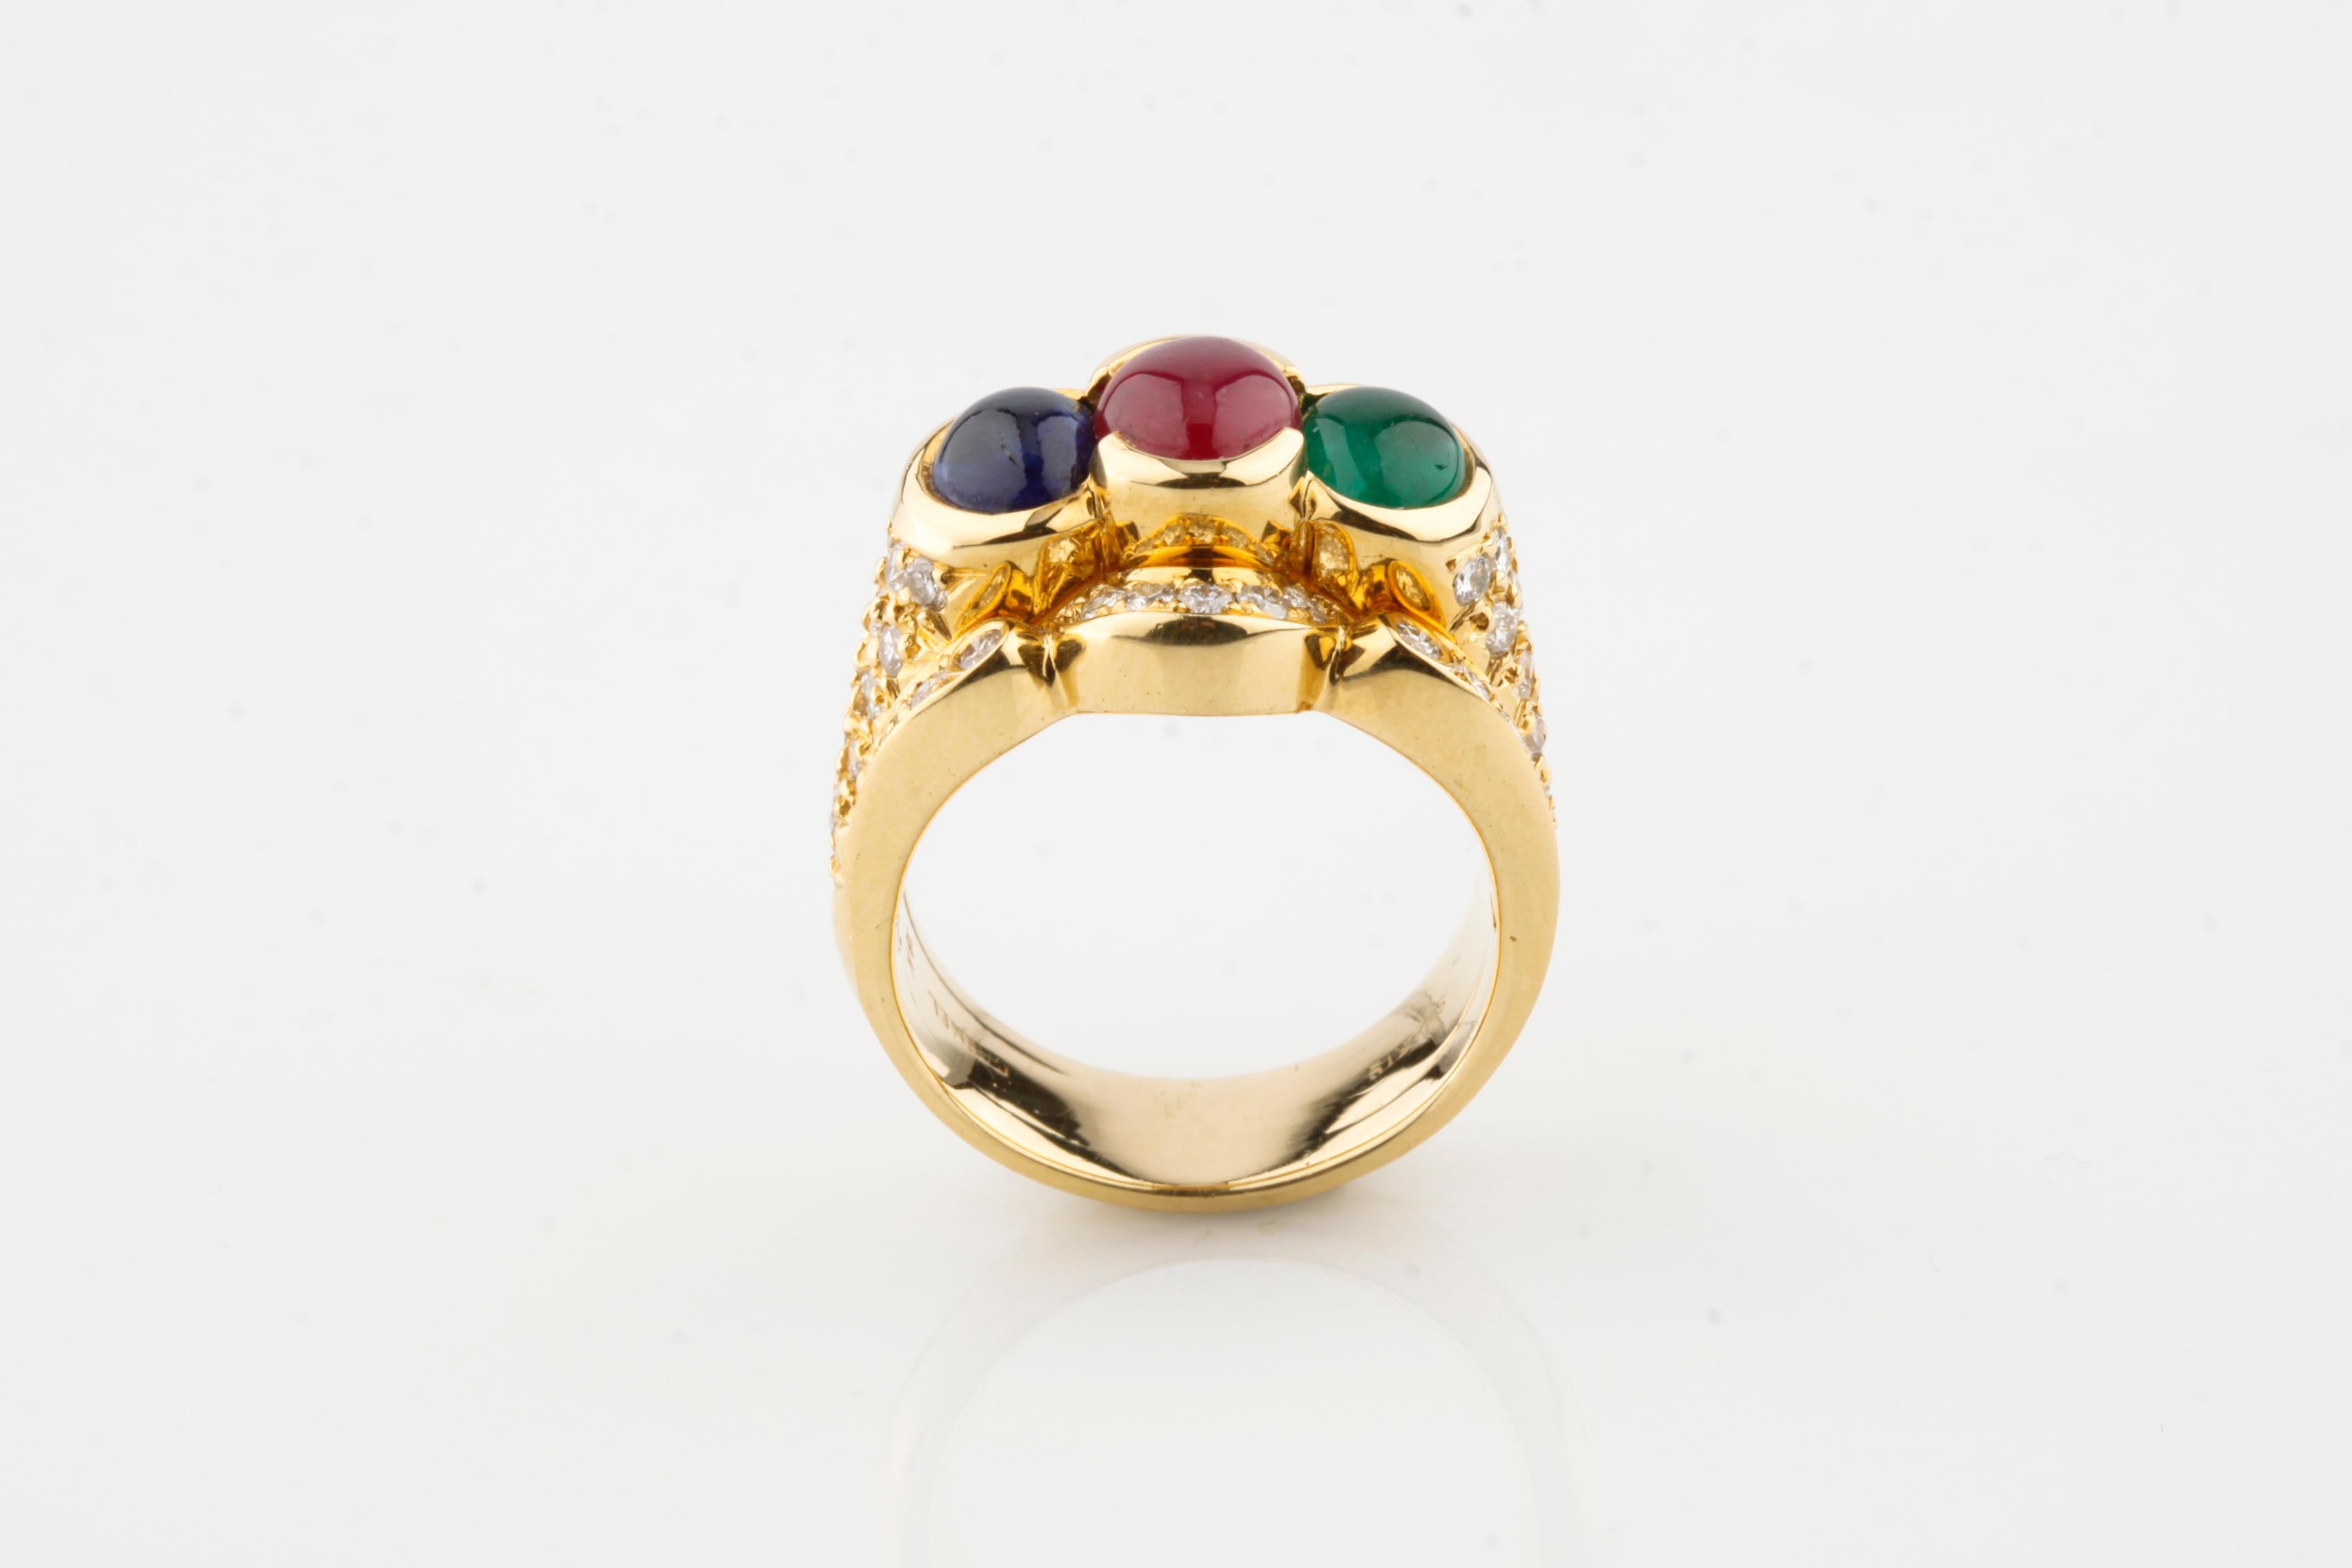 yellow sapphire ruby and emerald combination